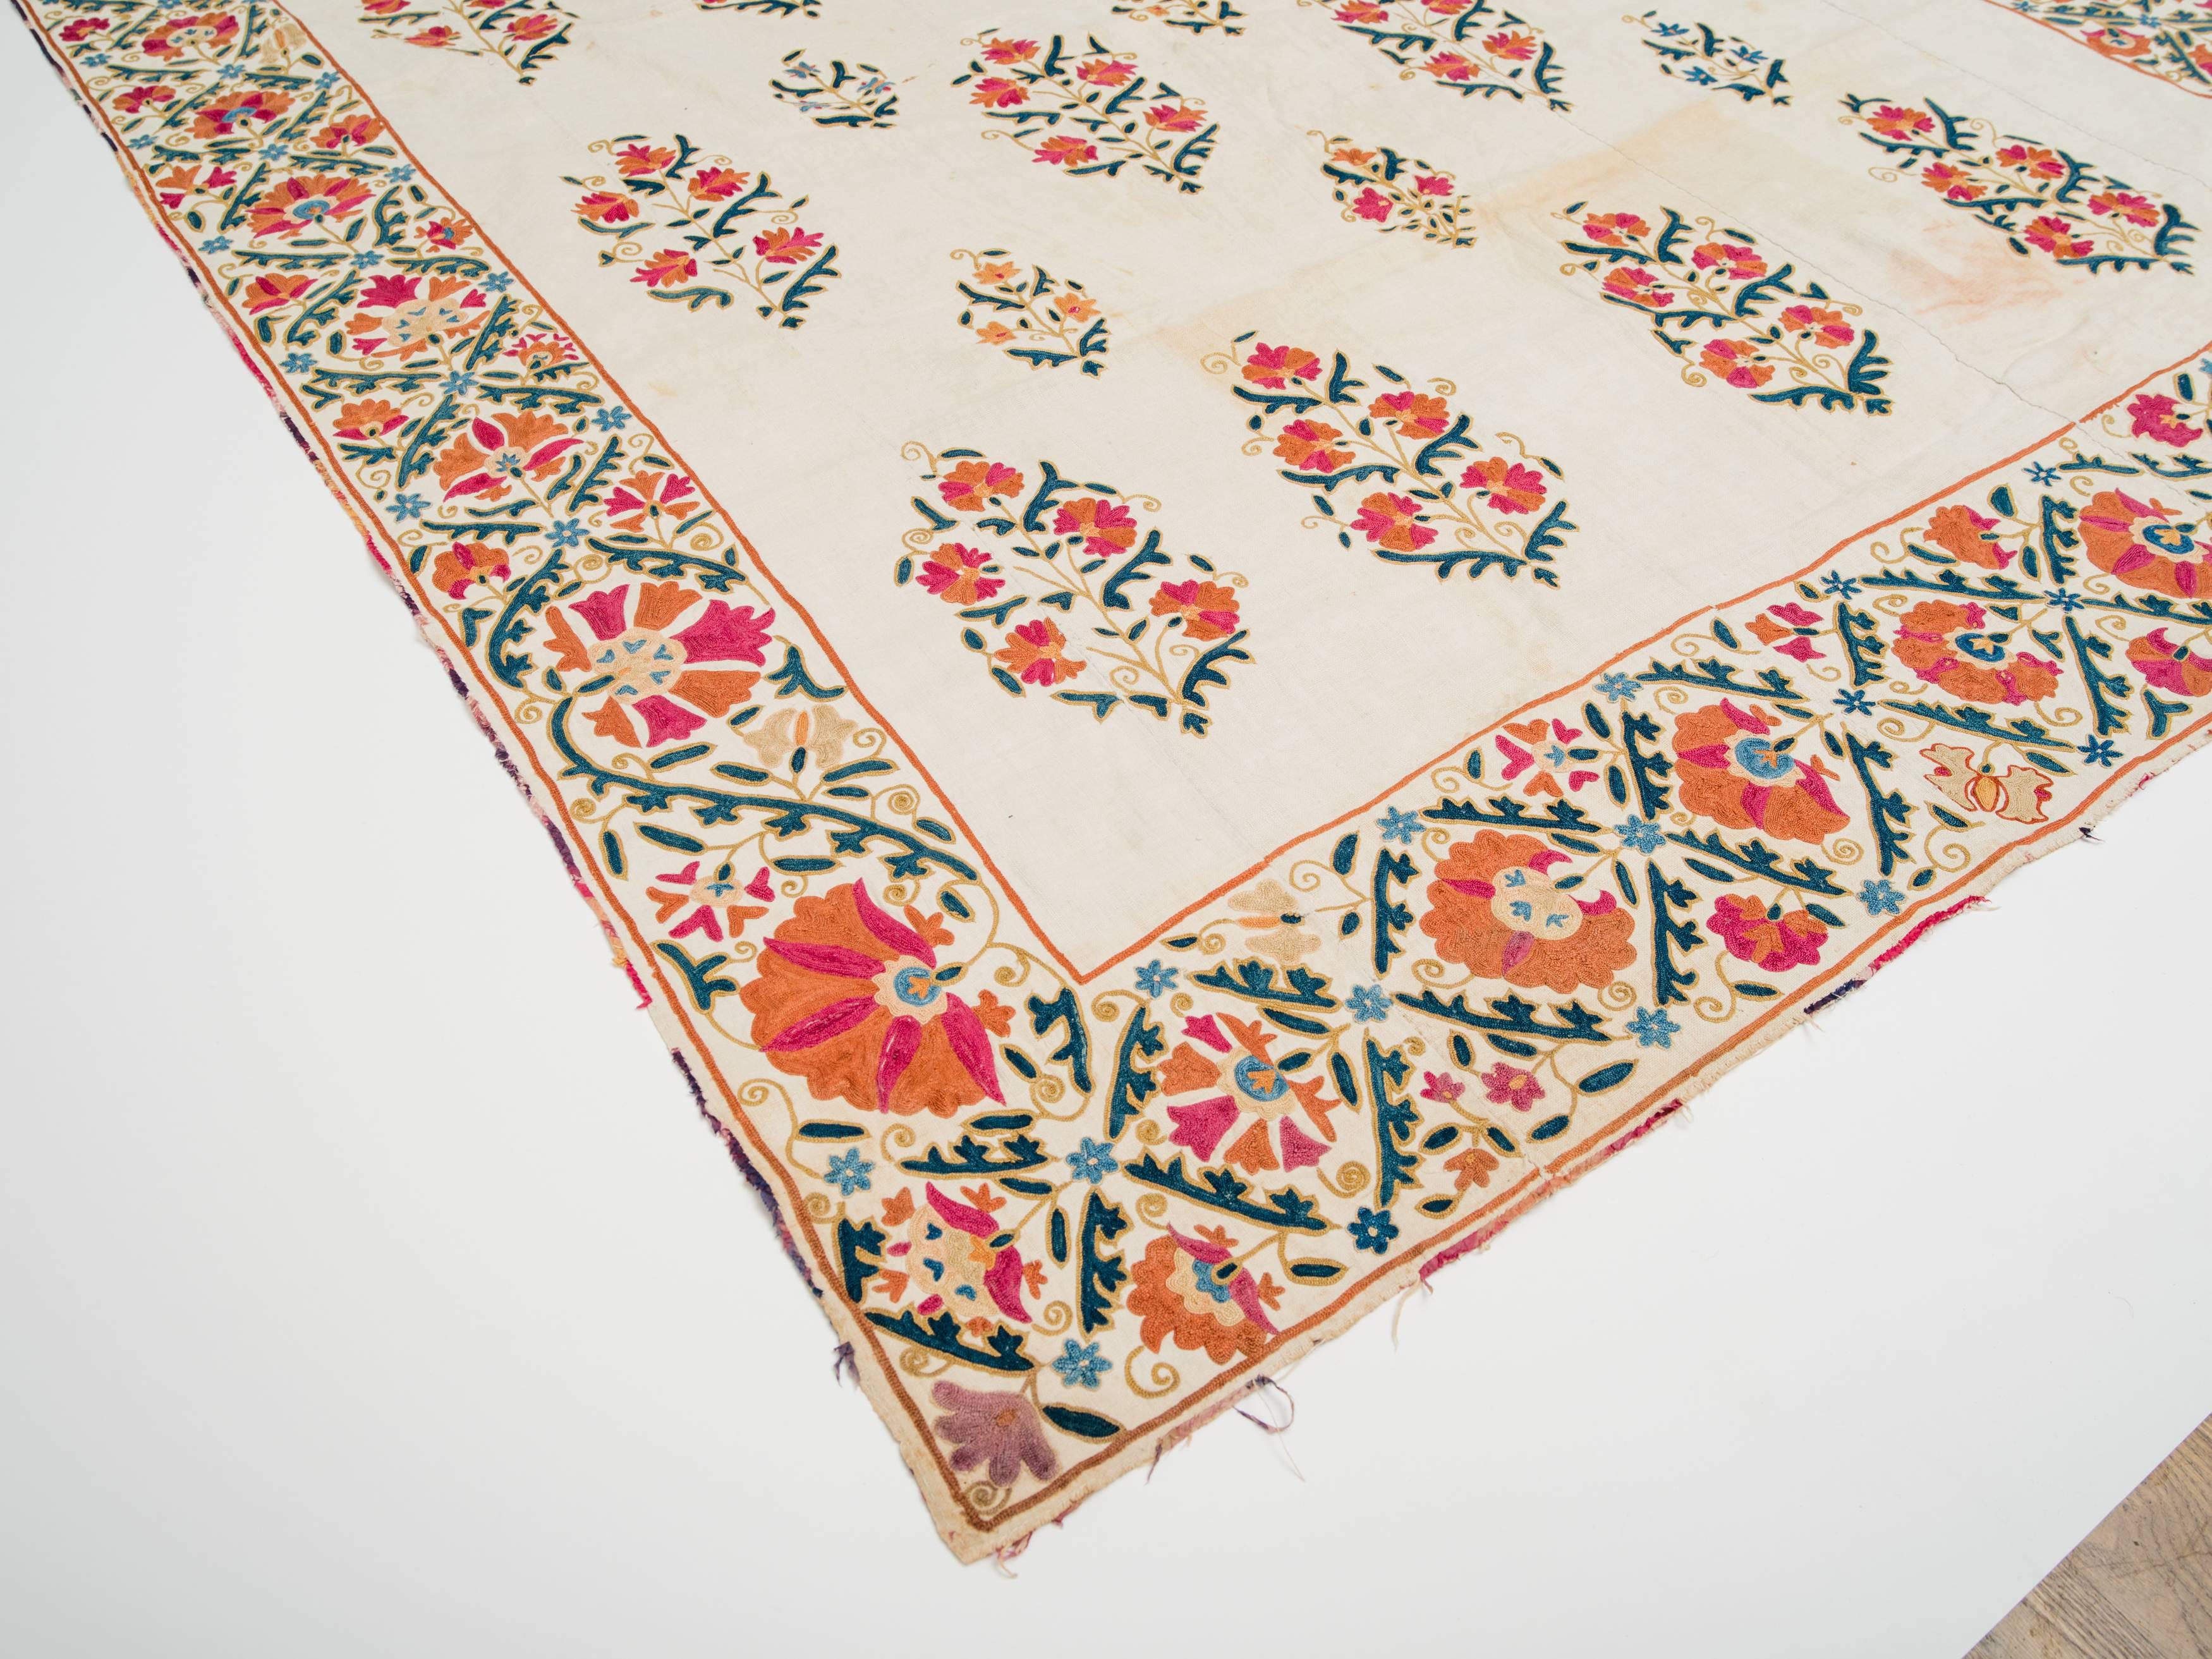 19th century Uzbekistani hand spun linen Suzani with silk embroidered floral motif and silk ikat border. Reverse side has original antique Fine hand printed cotton backing.
 